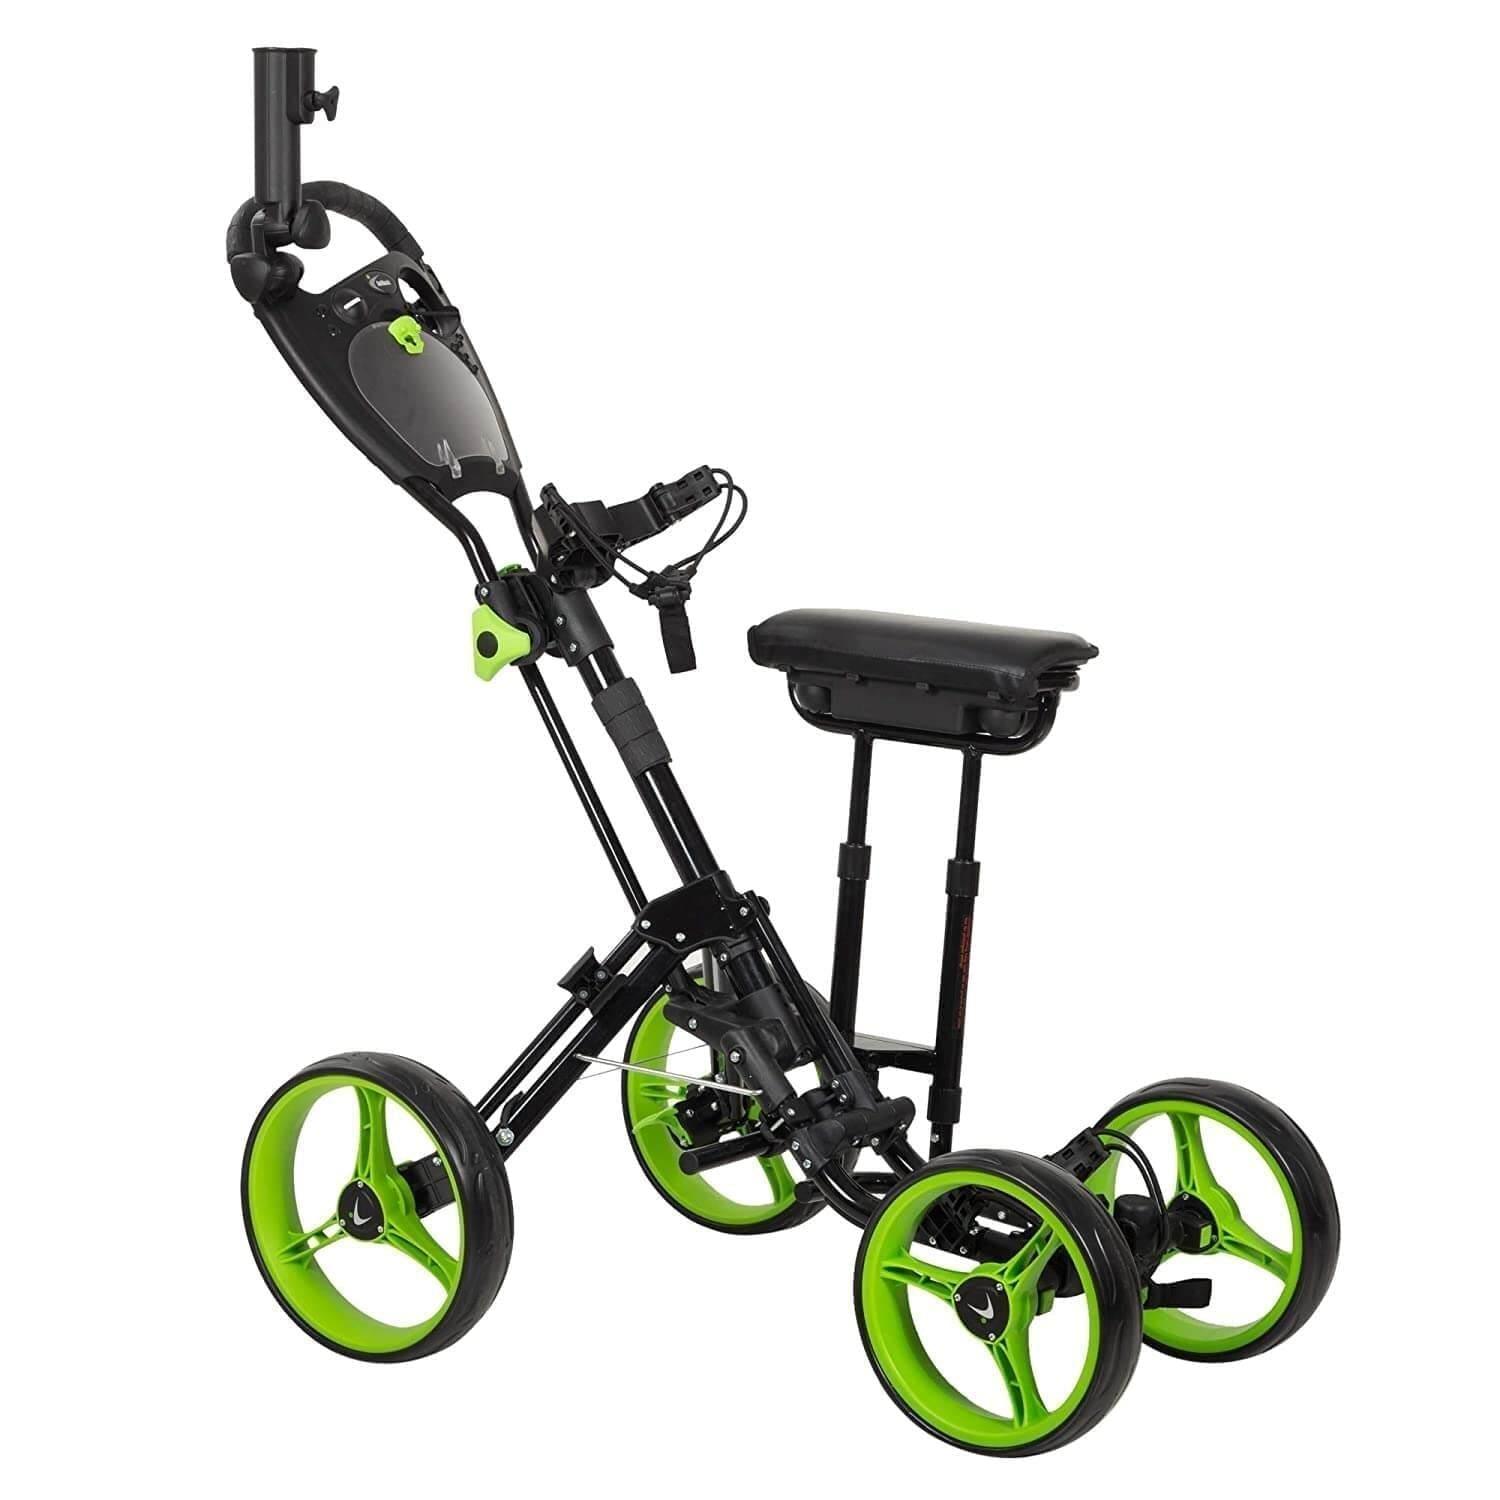 GolfBasic Seat For Four Wheel Trolley In India | golfedge  | India’s Favourite Online Golf Store | golfedgeindia.com